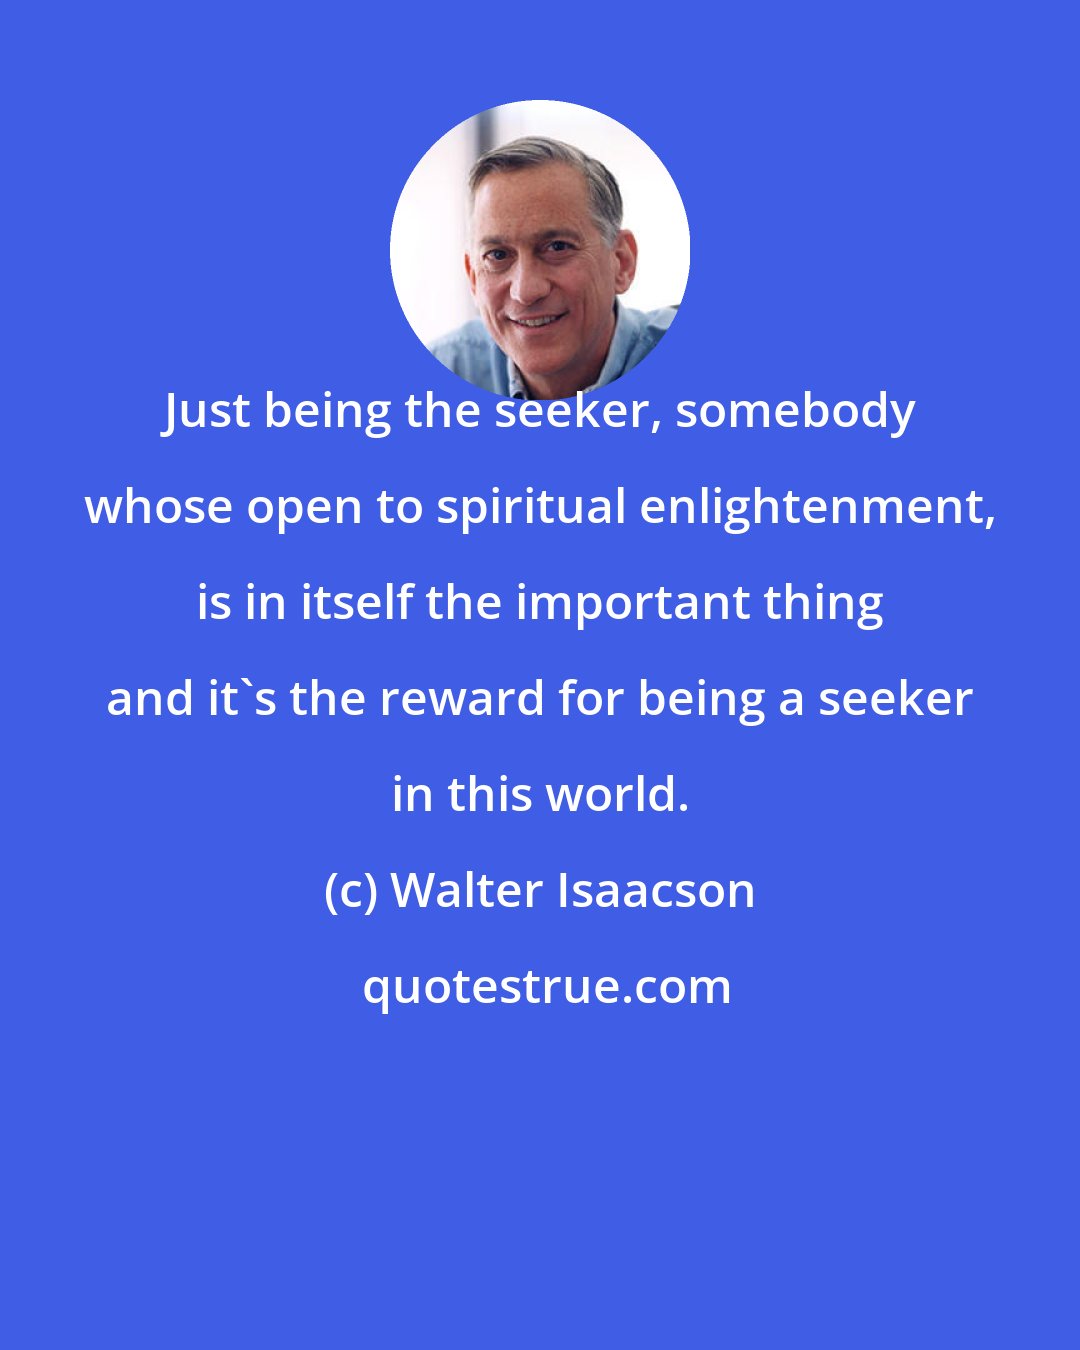 Walter Isaacson: Just being the seeker, somebody whose open to spiritual enlightenment, is in itself the important thing and it's the reward for being a seeker in this world.